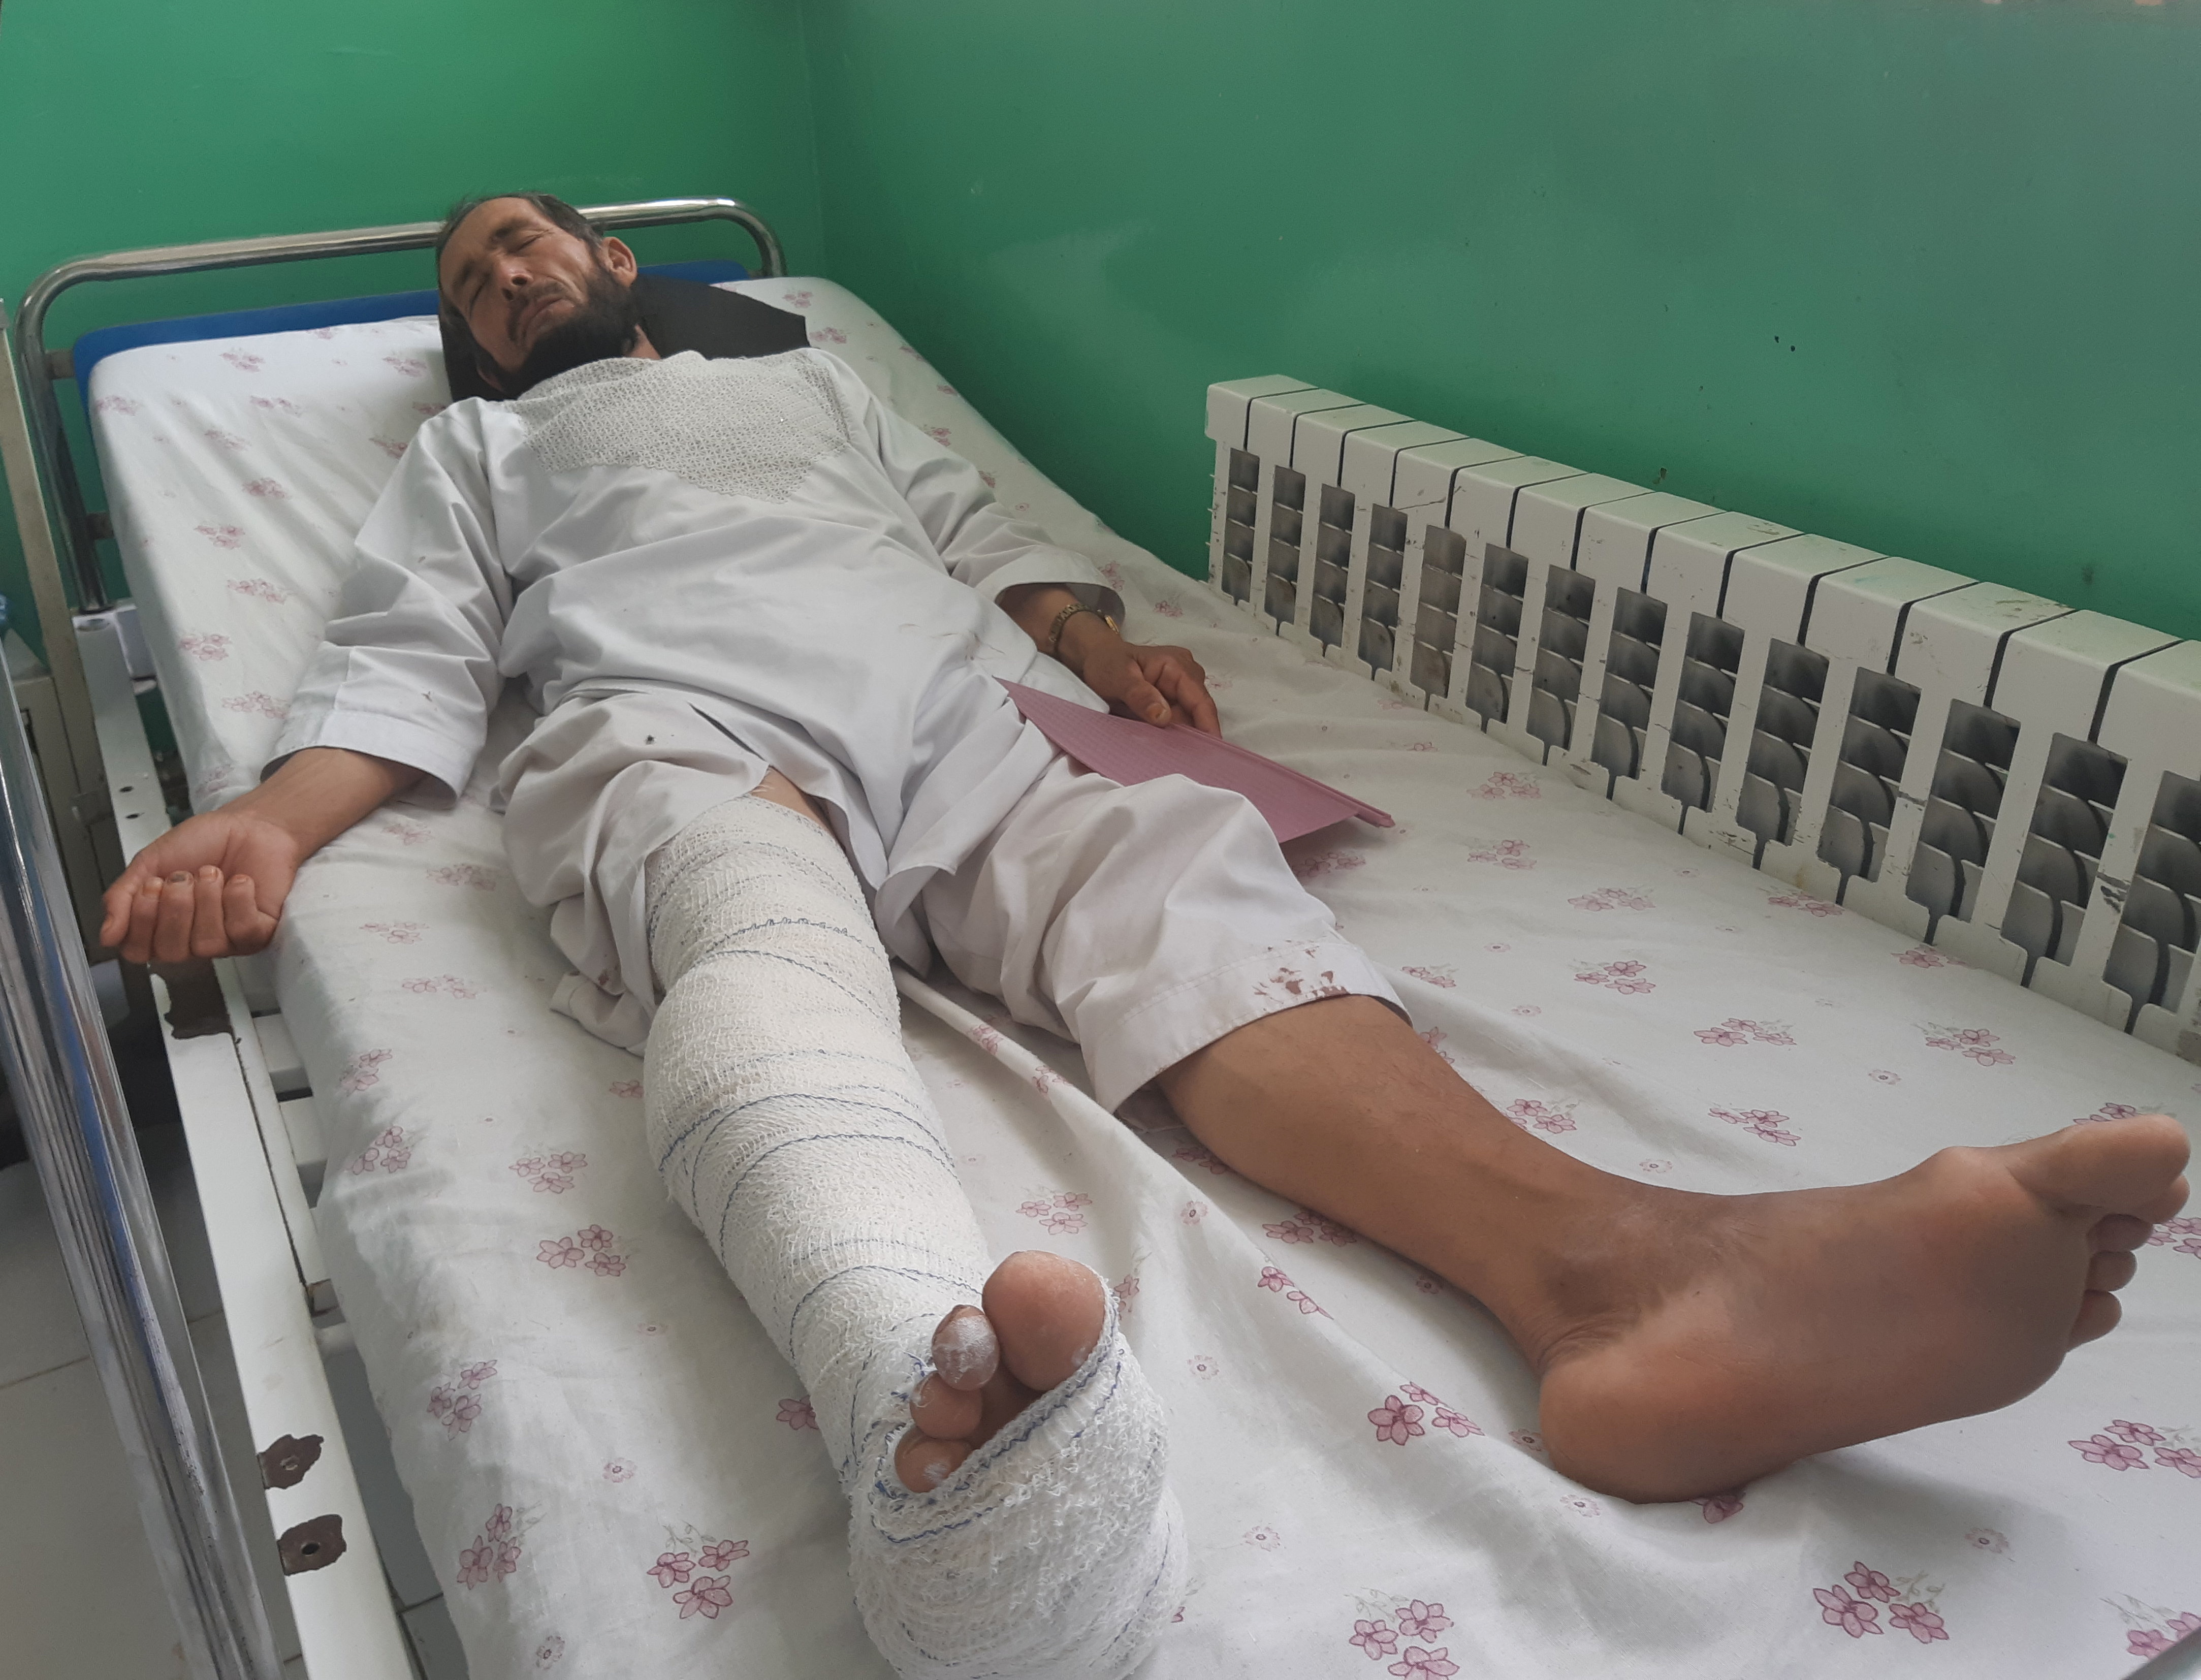 Wounded worker from a de-mining organisation receives treatment at a hospital in Baghlan province